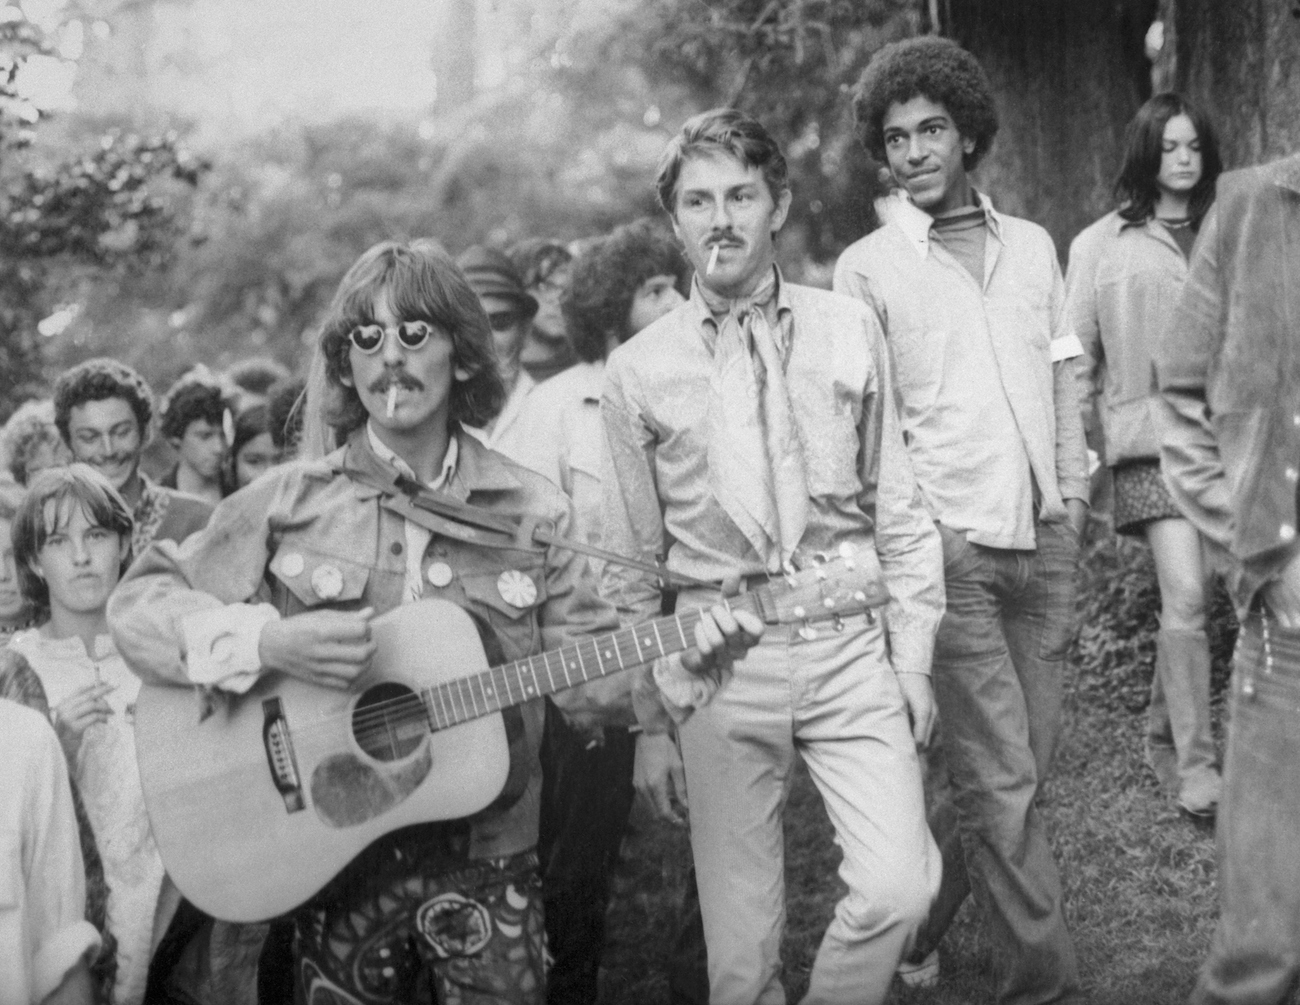 George Harrison at Haight Ashbury in 1967.